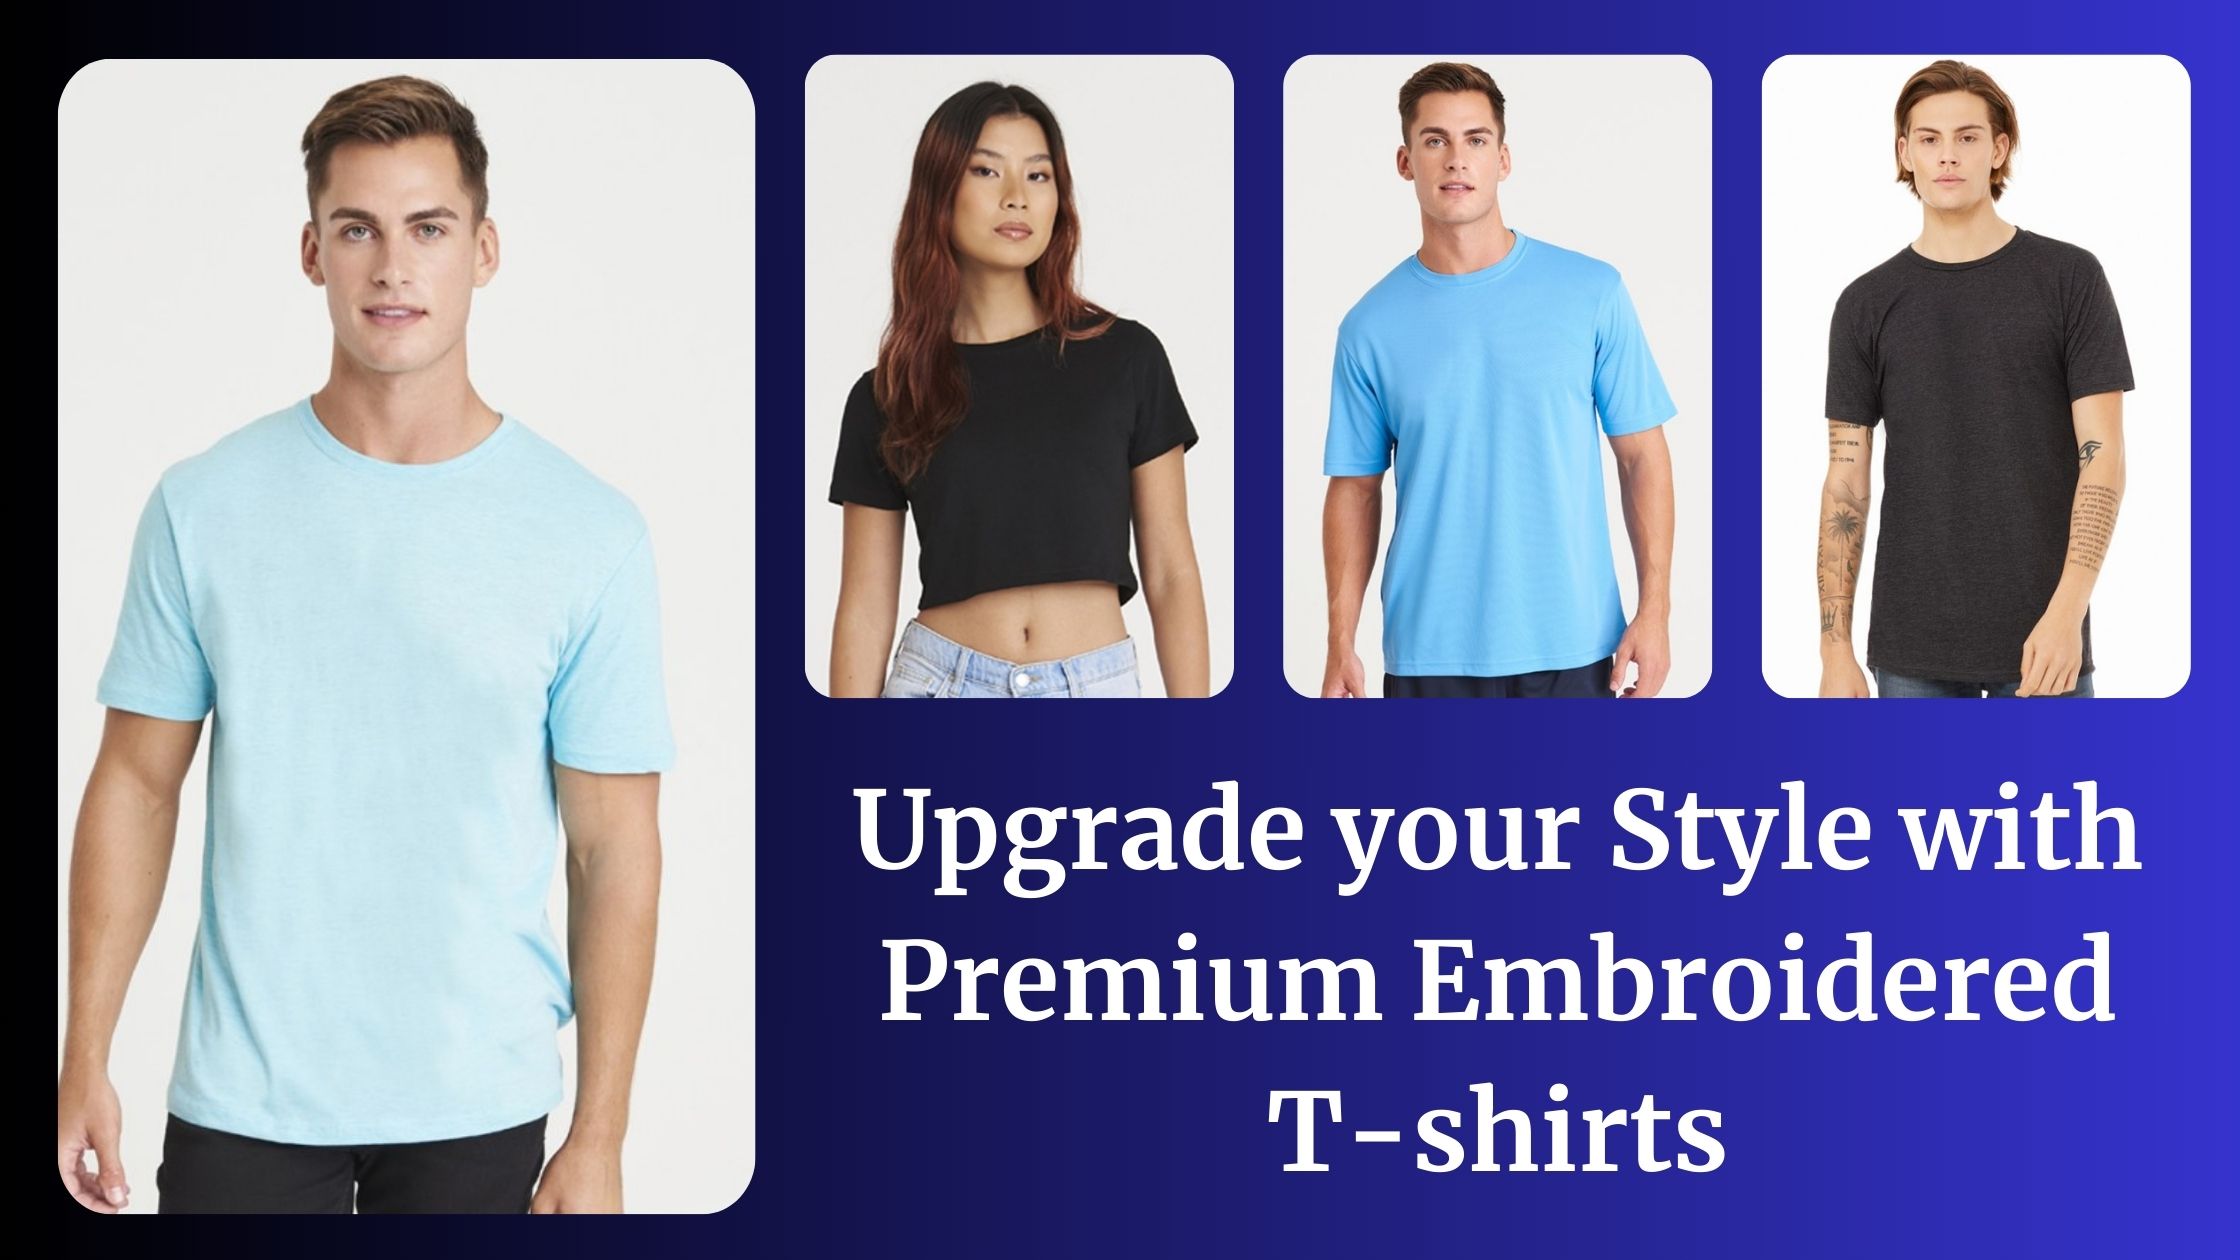 Upgrade your Style with Premium Embroidered T-shirts